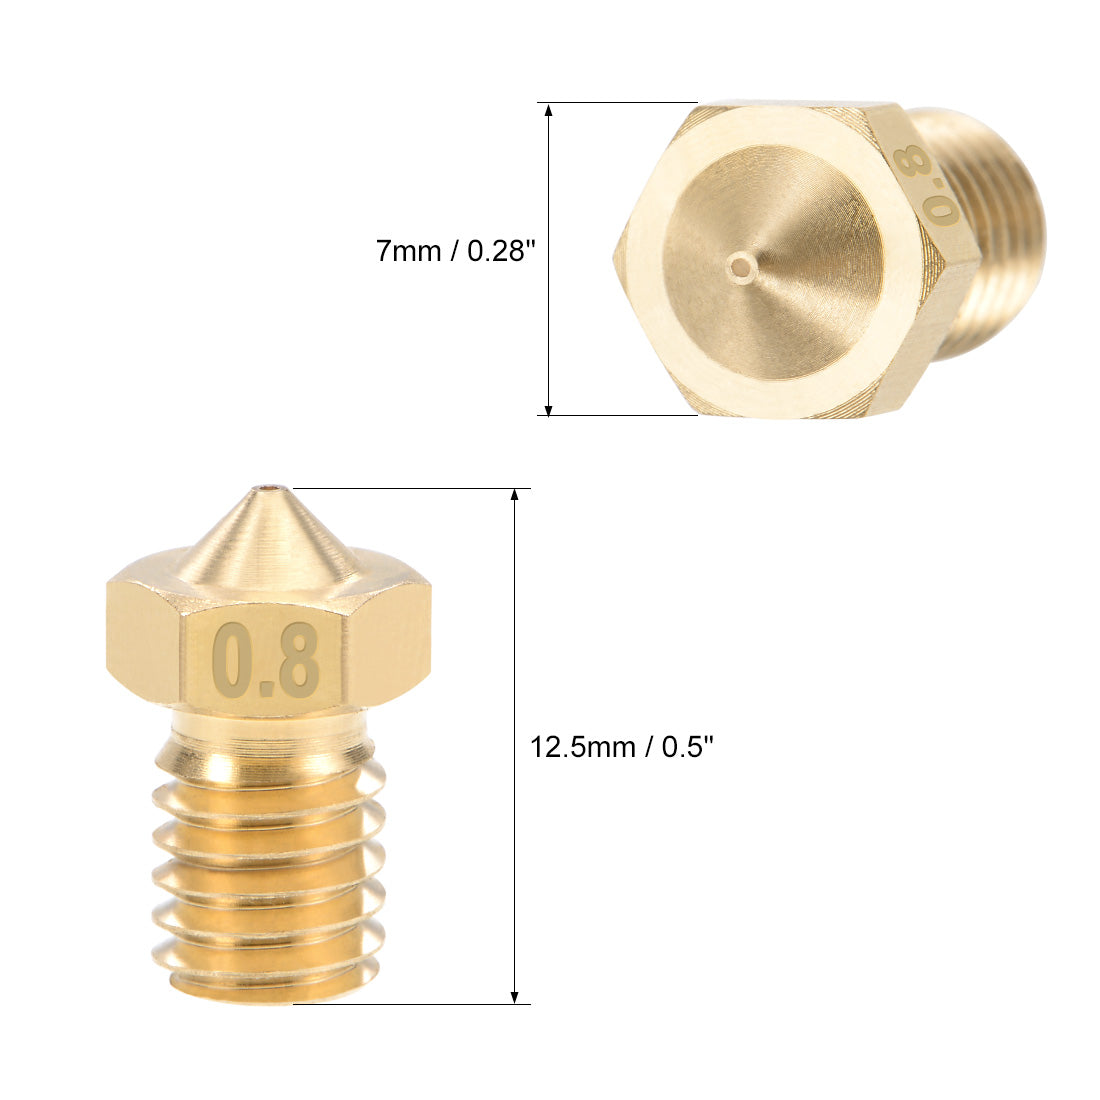 uxcell Uxcell 0.8mm 3D Printer Nozzle Head M6 for V5 V6 1.75mm Extruder Print, Brass 5pcs